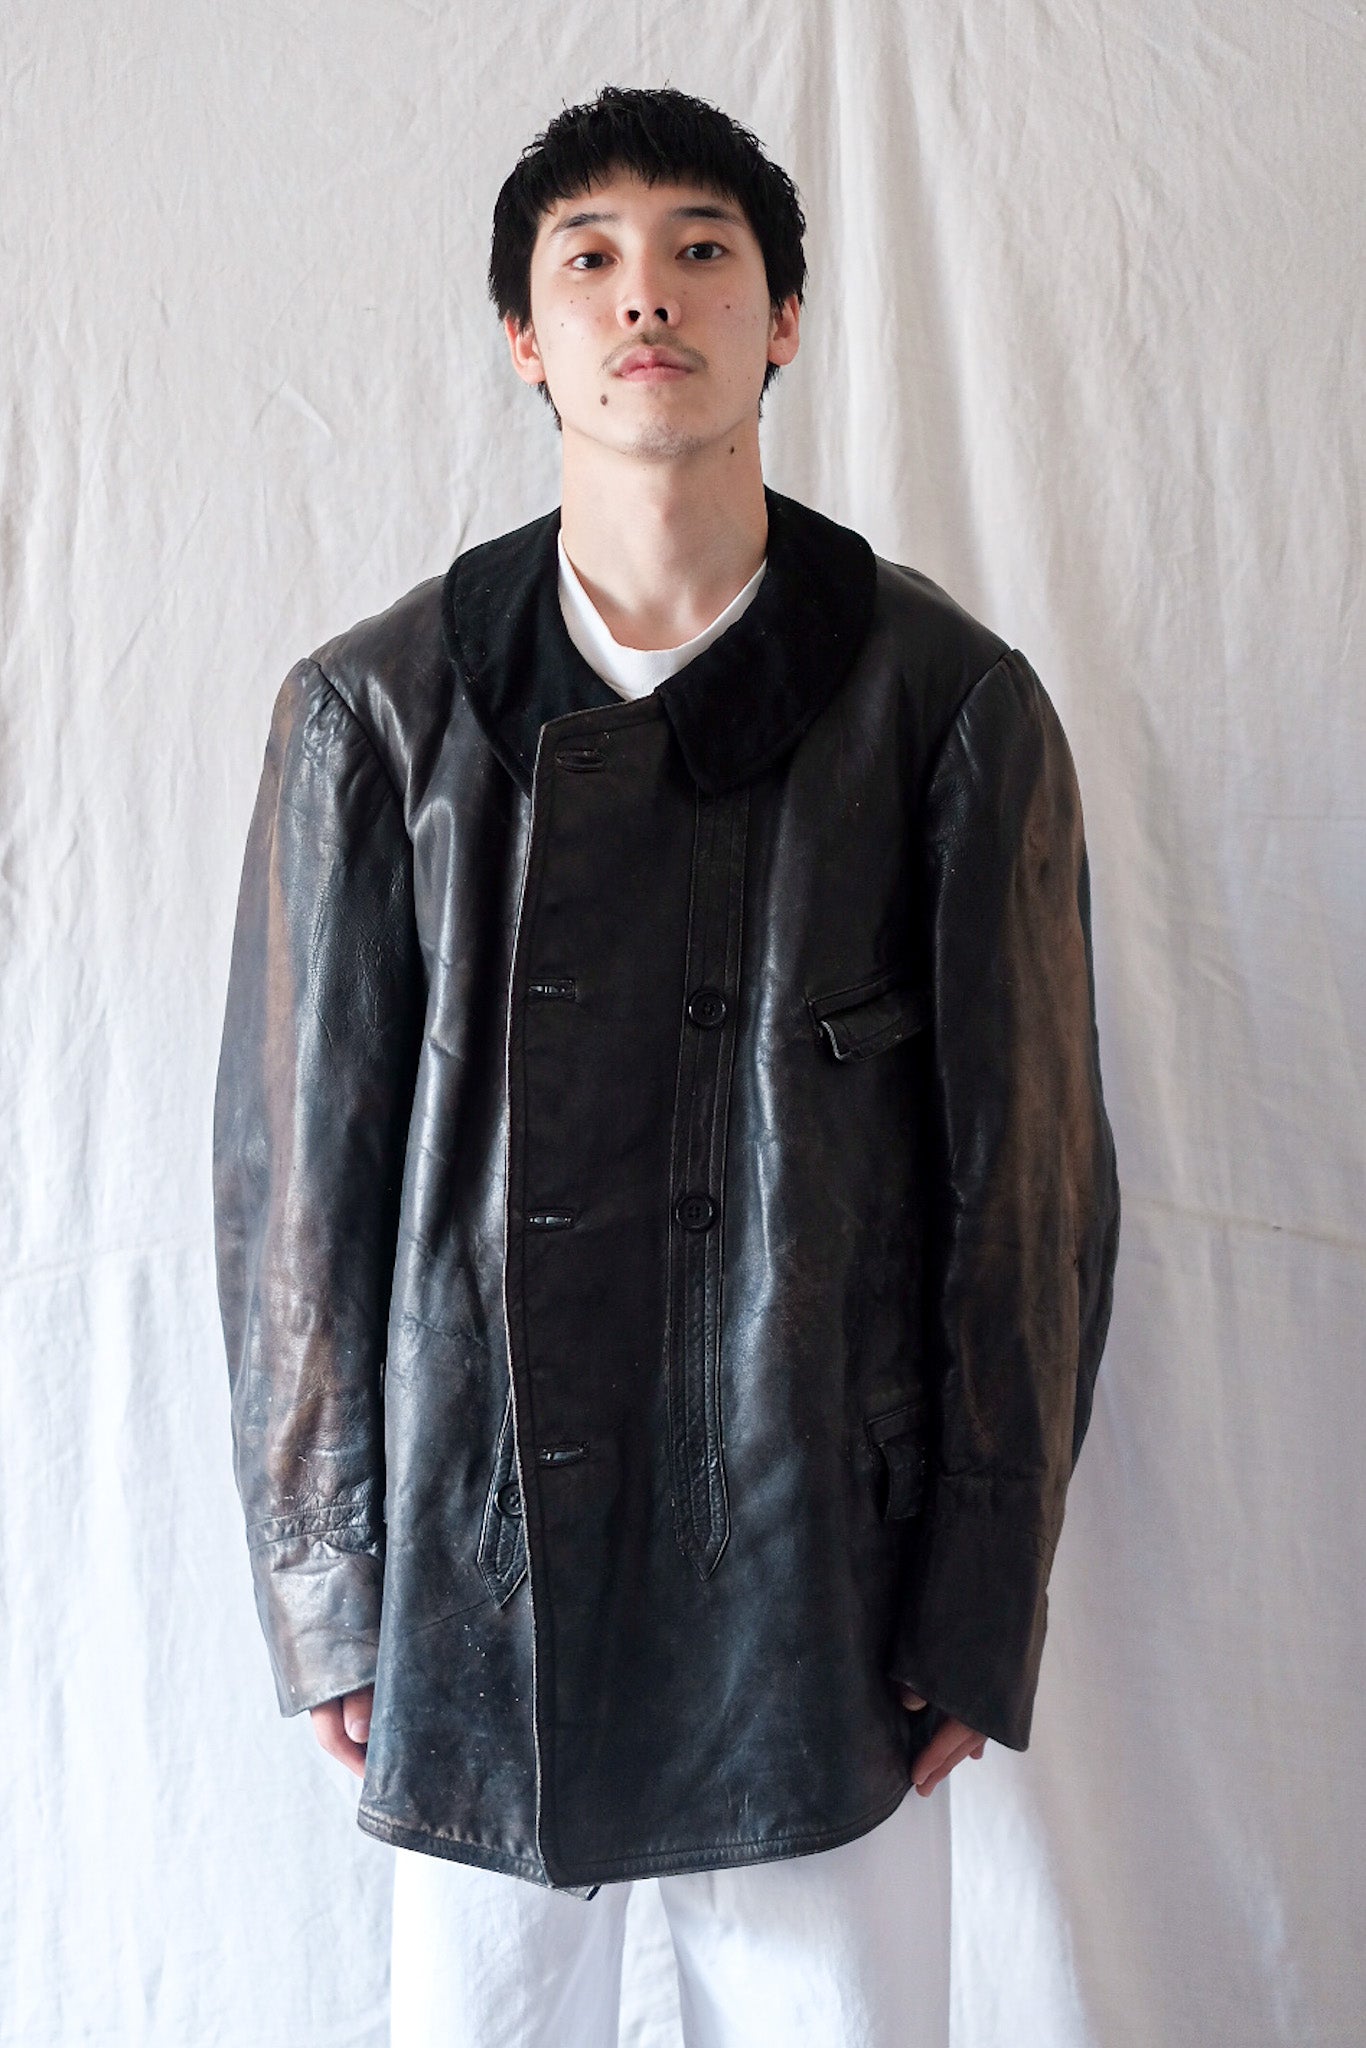 【~20's】French Vintage Le Corbusier Leather Work Jacket "Adolphe Lafont"